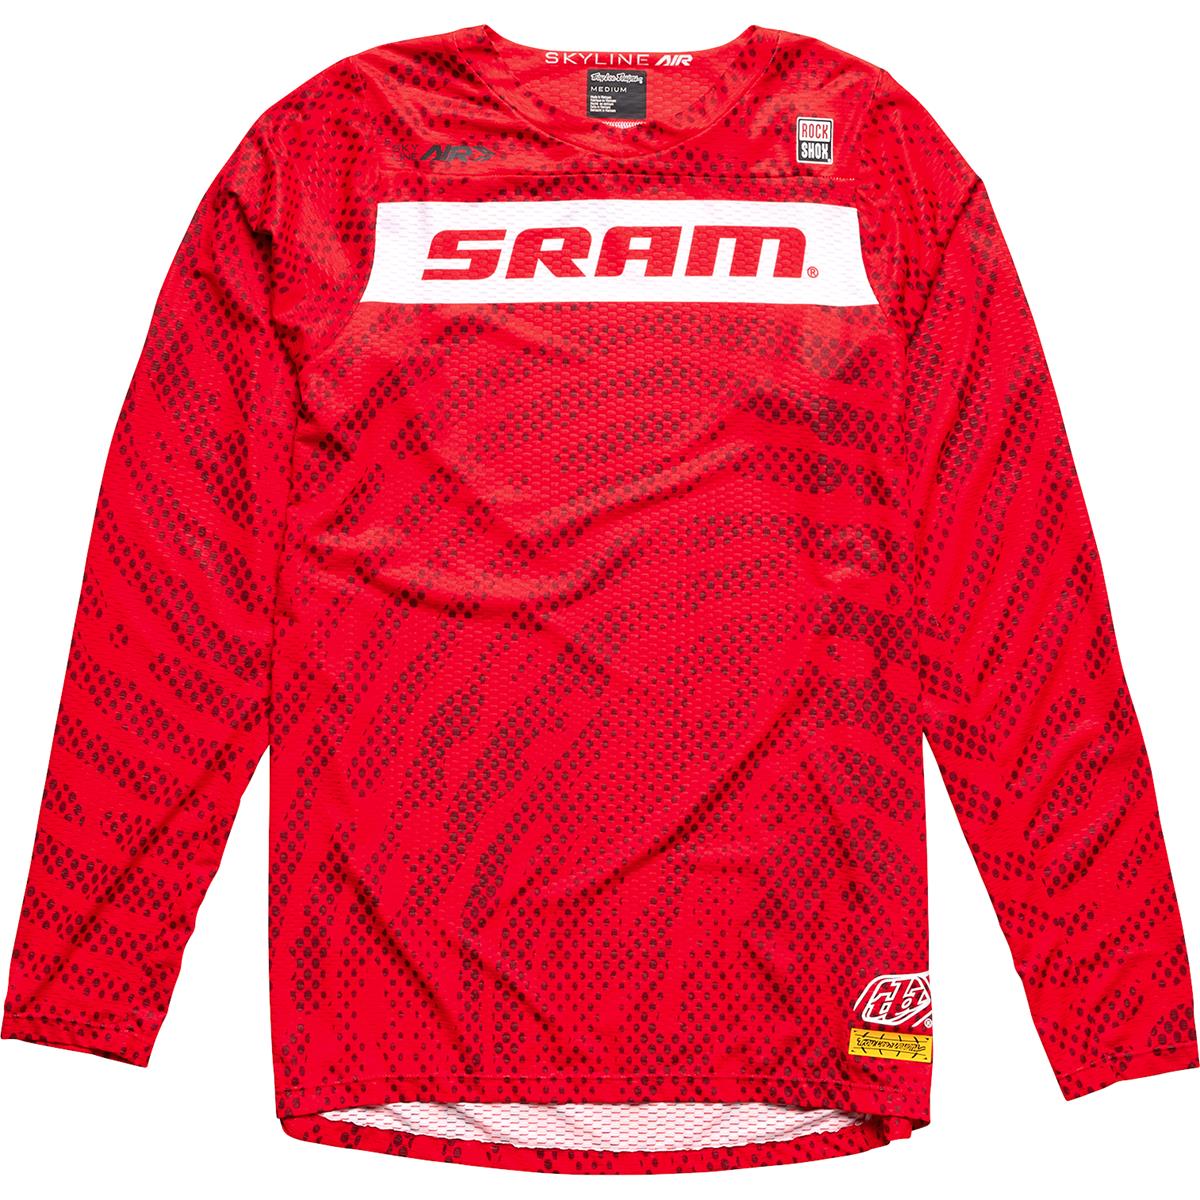 Troy Lee Designs Maglia MTB manica lunga Skyline Air Sram - Roots Fiery Red